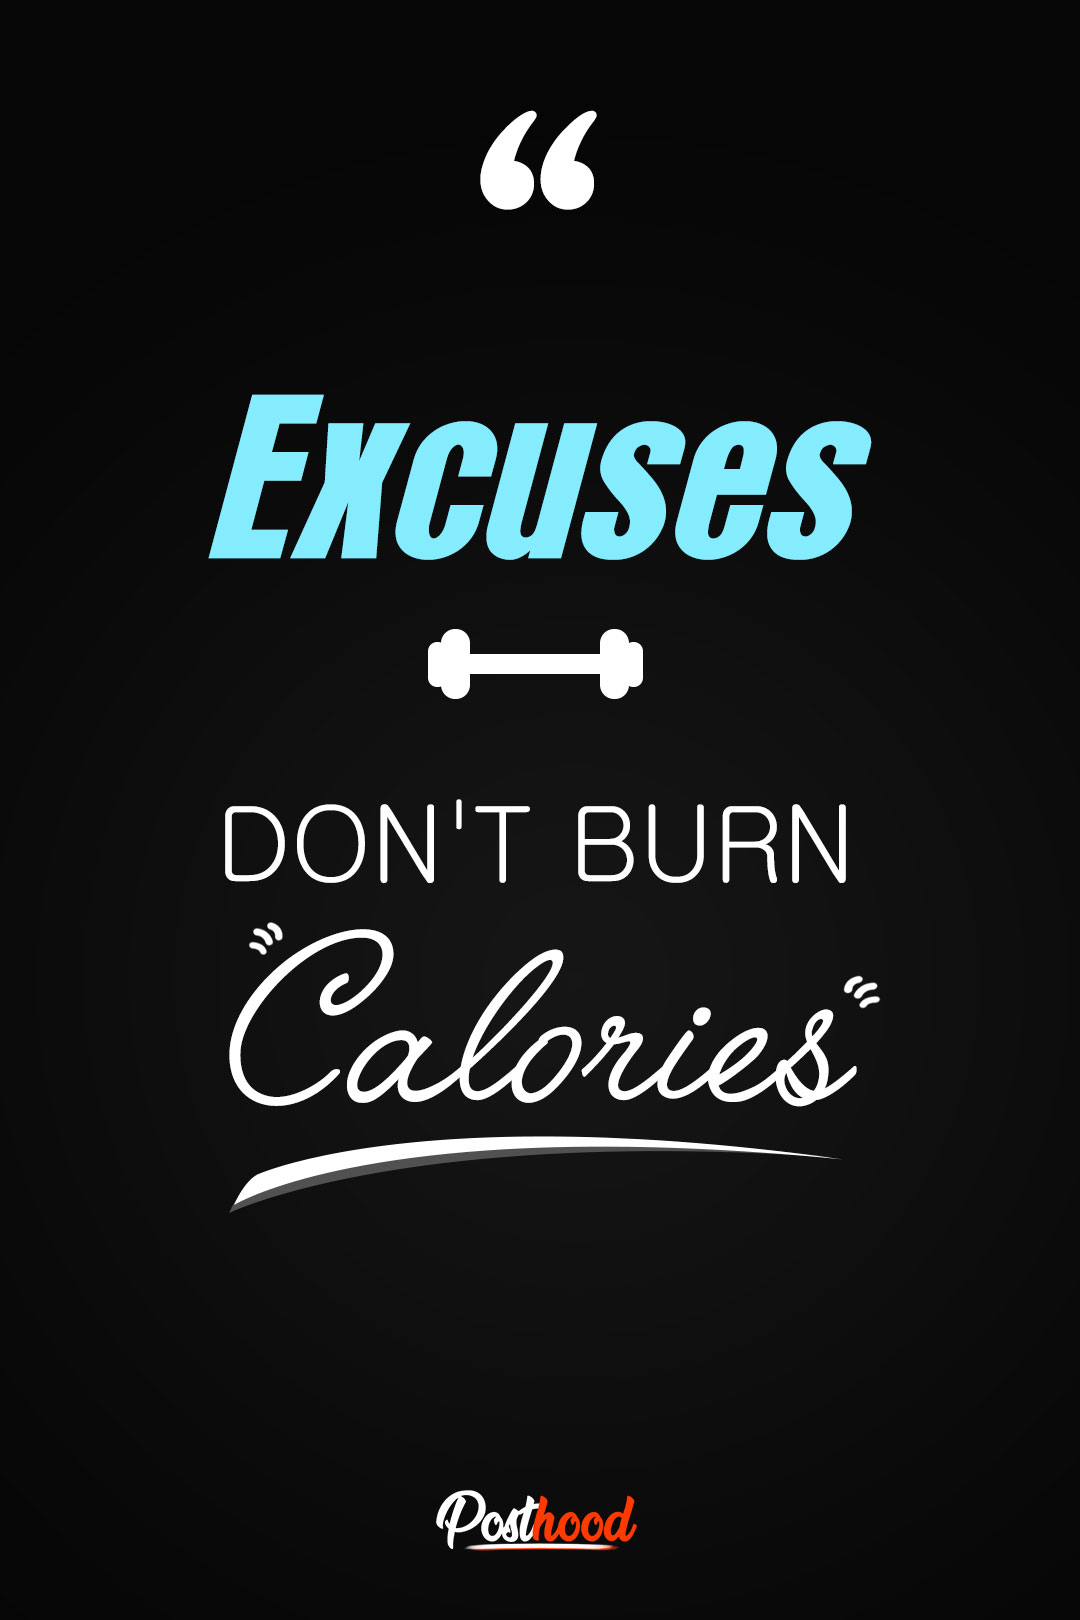 Excuses! Don’t burn calories. Morning Workout Motivation Quotes. Fitness Wallpaper for Smartphone.